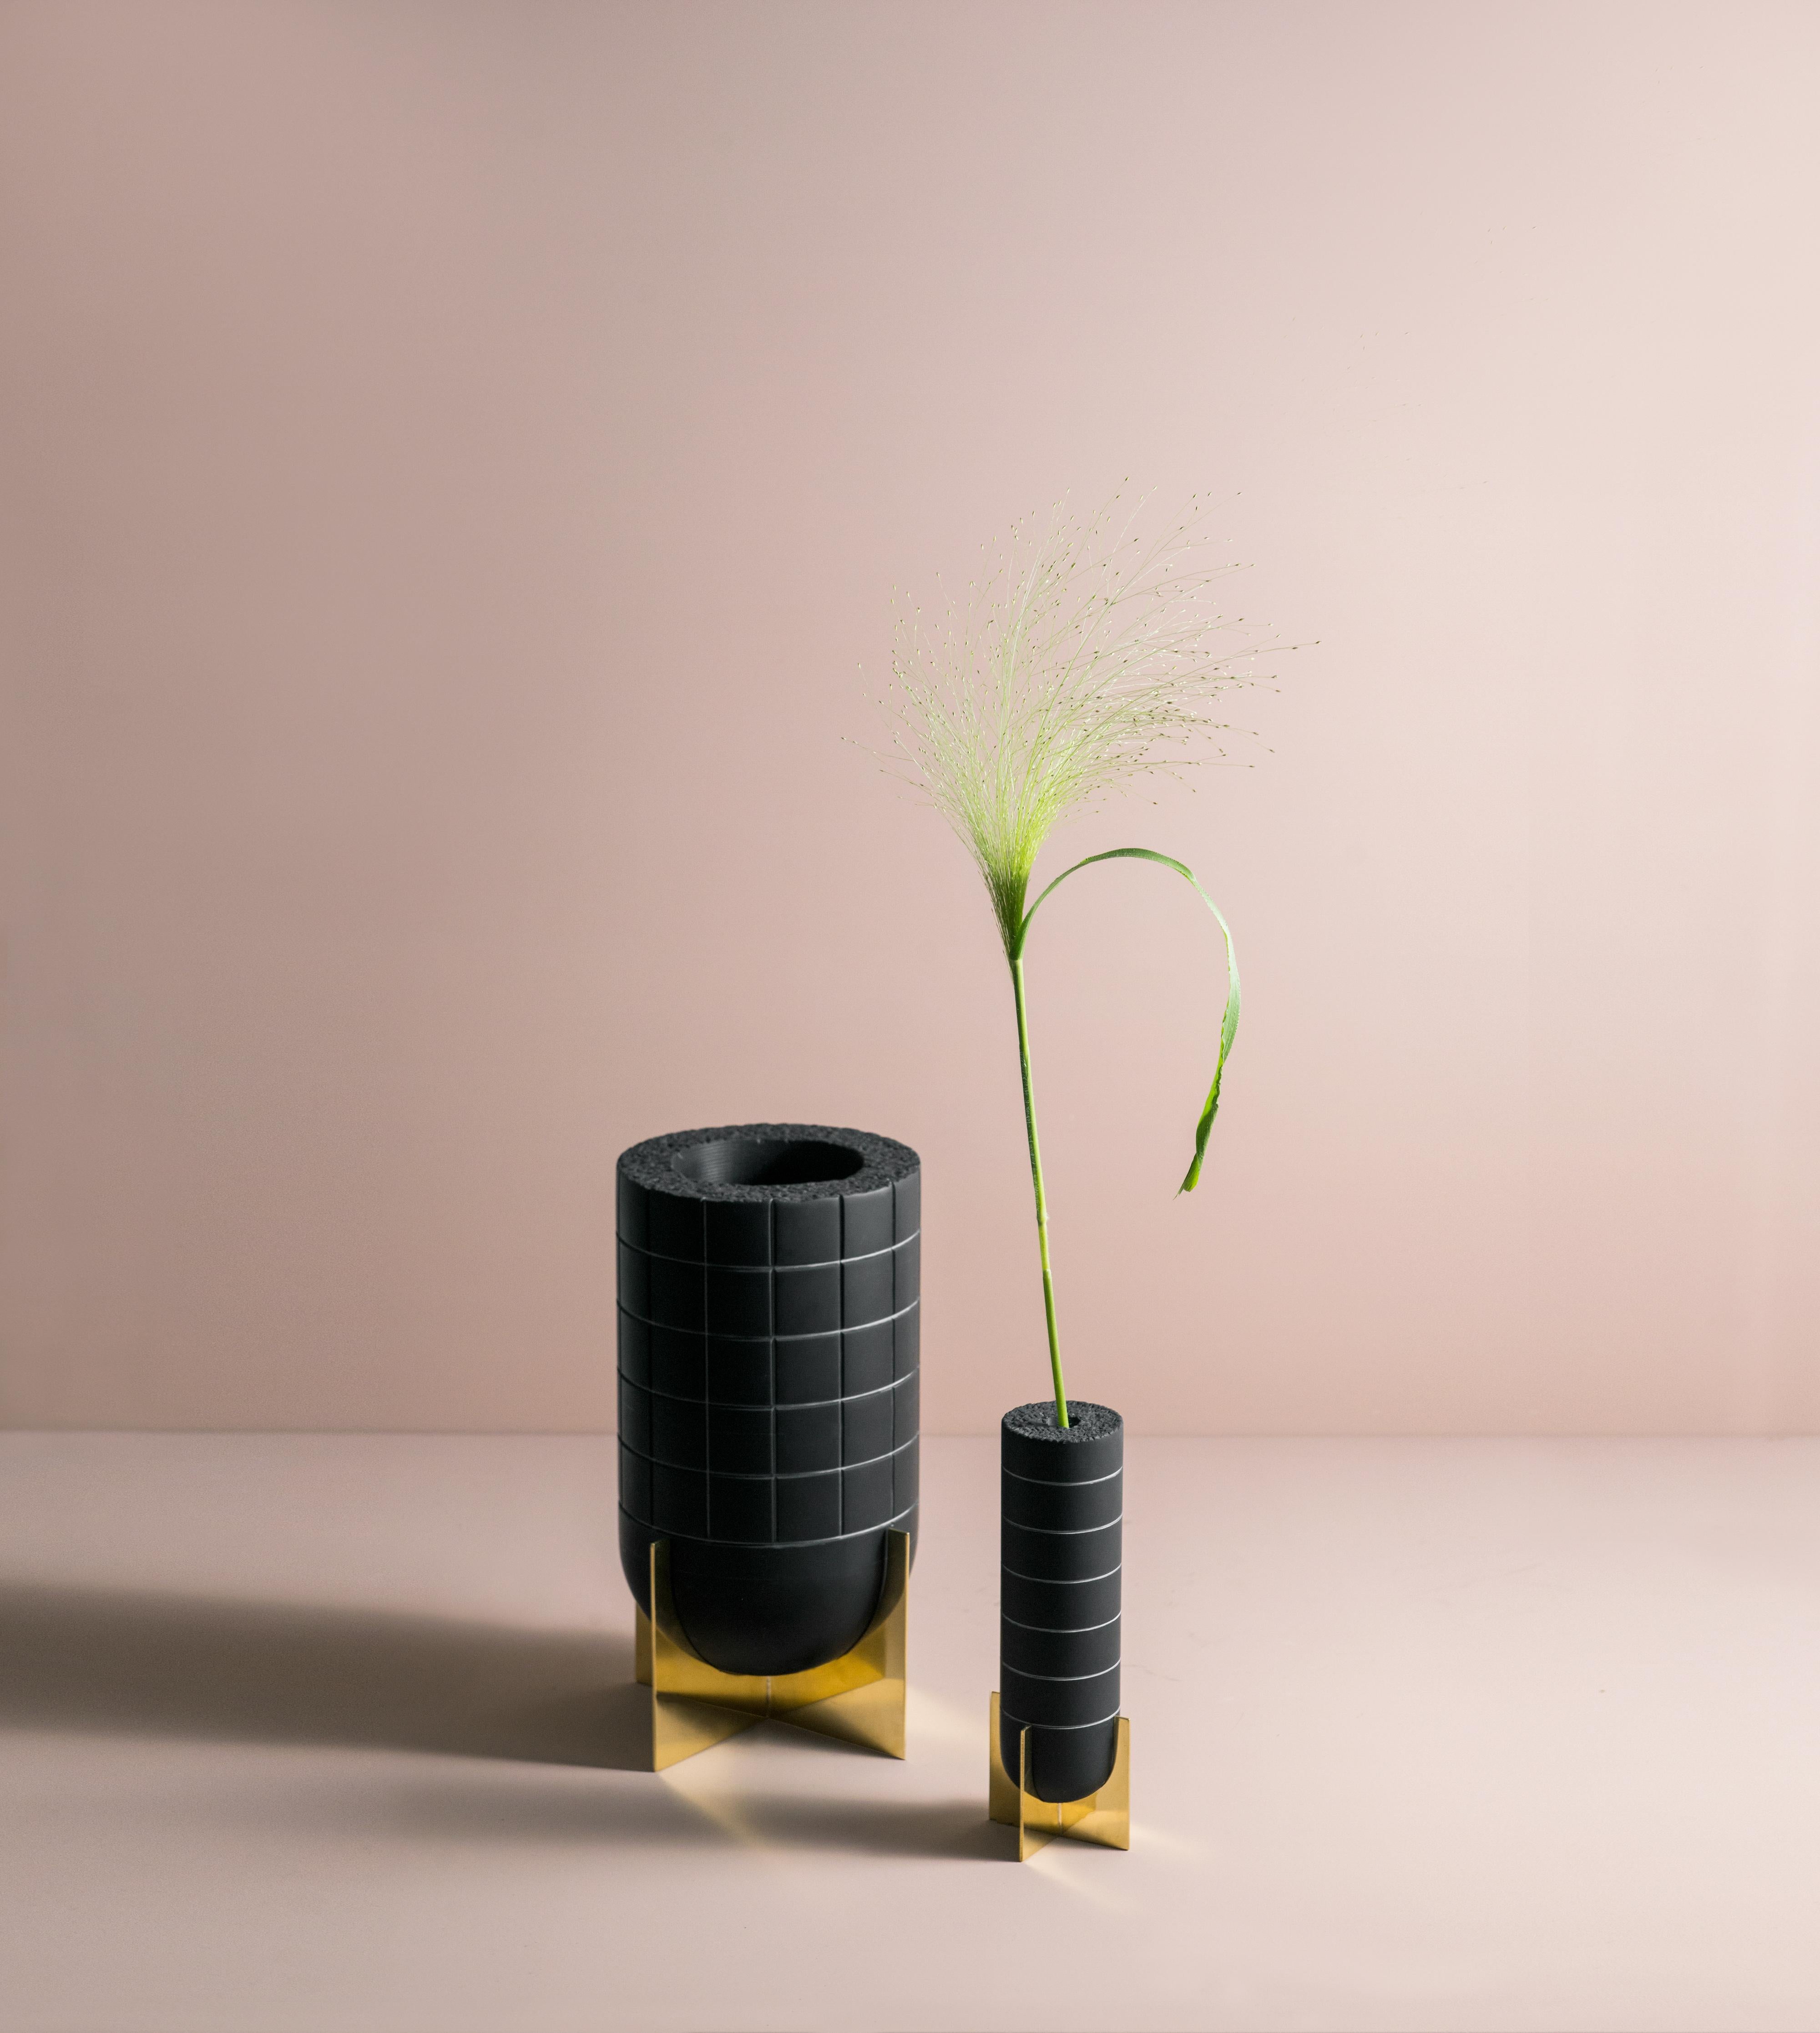 Cavi vases collection is the result of research conducted on the processing techniques
of Lavagna stone where raw elements and precious details celebrate a locally sourced material by creating objects which juxtapose balancing and contrasting